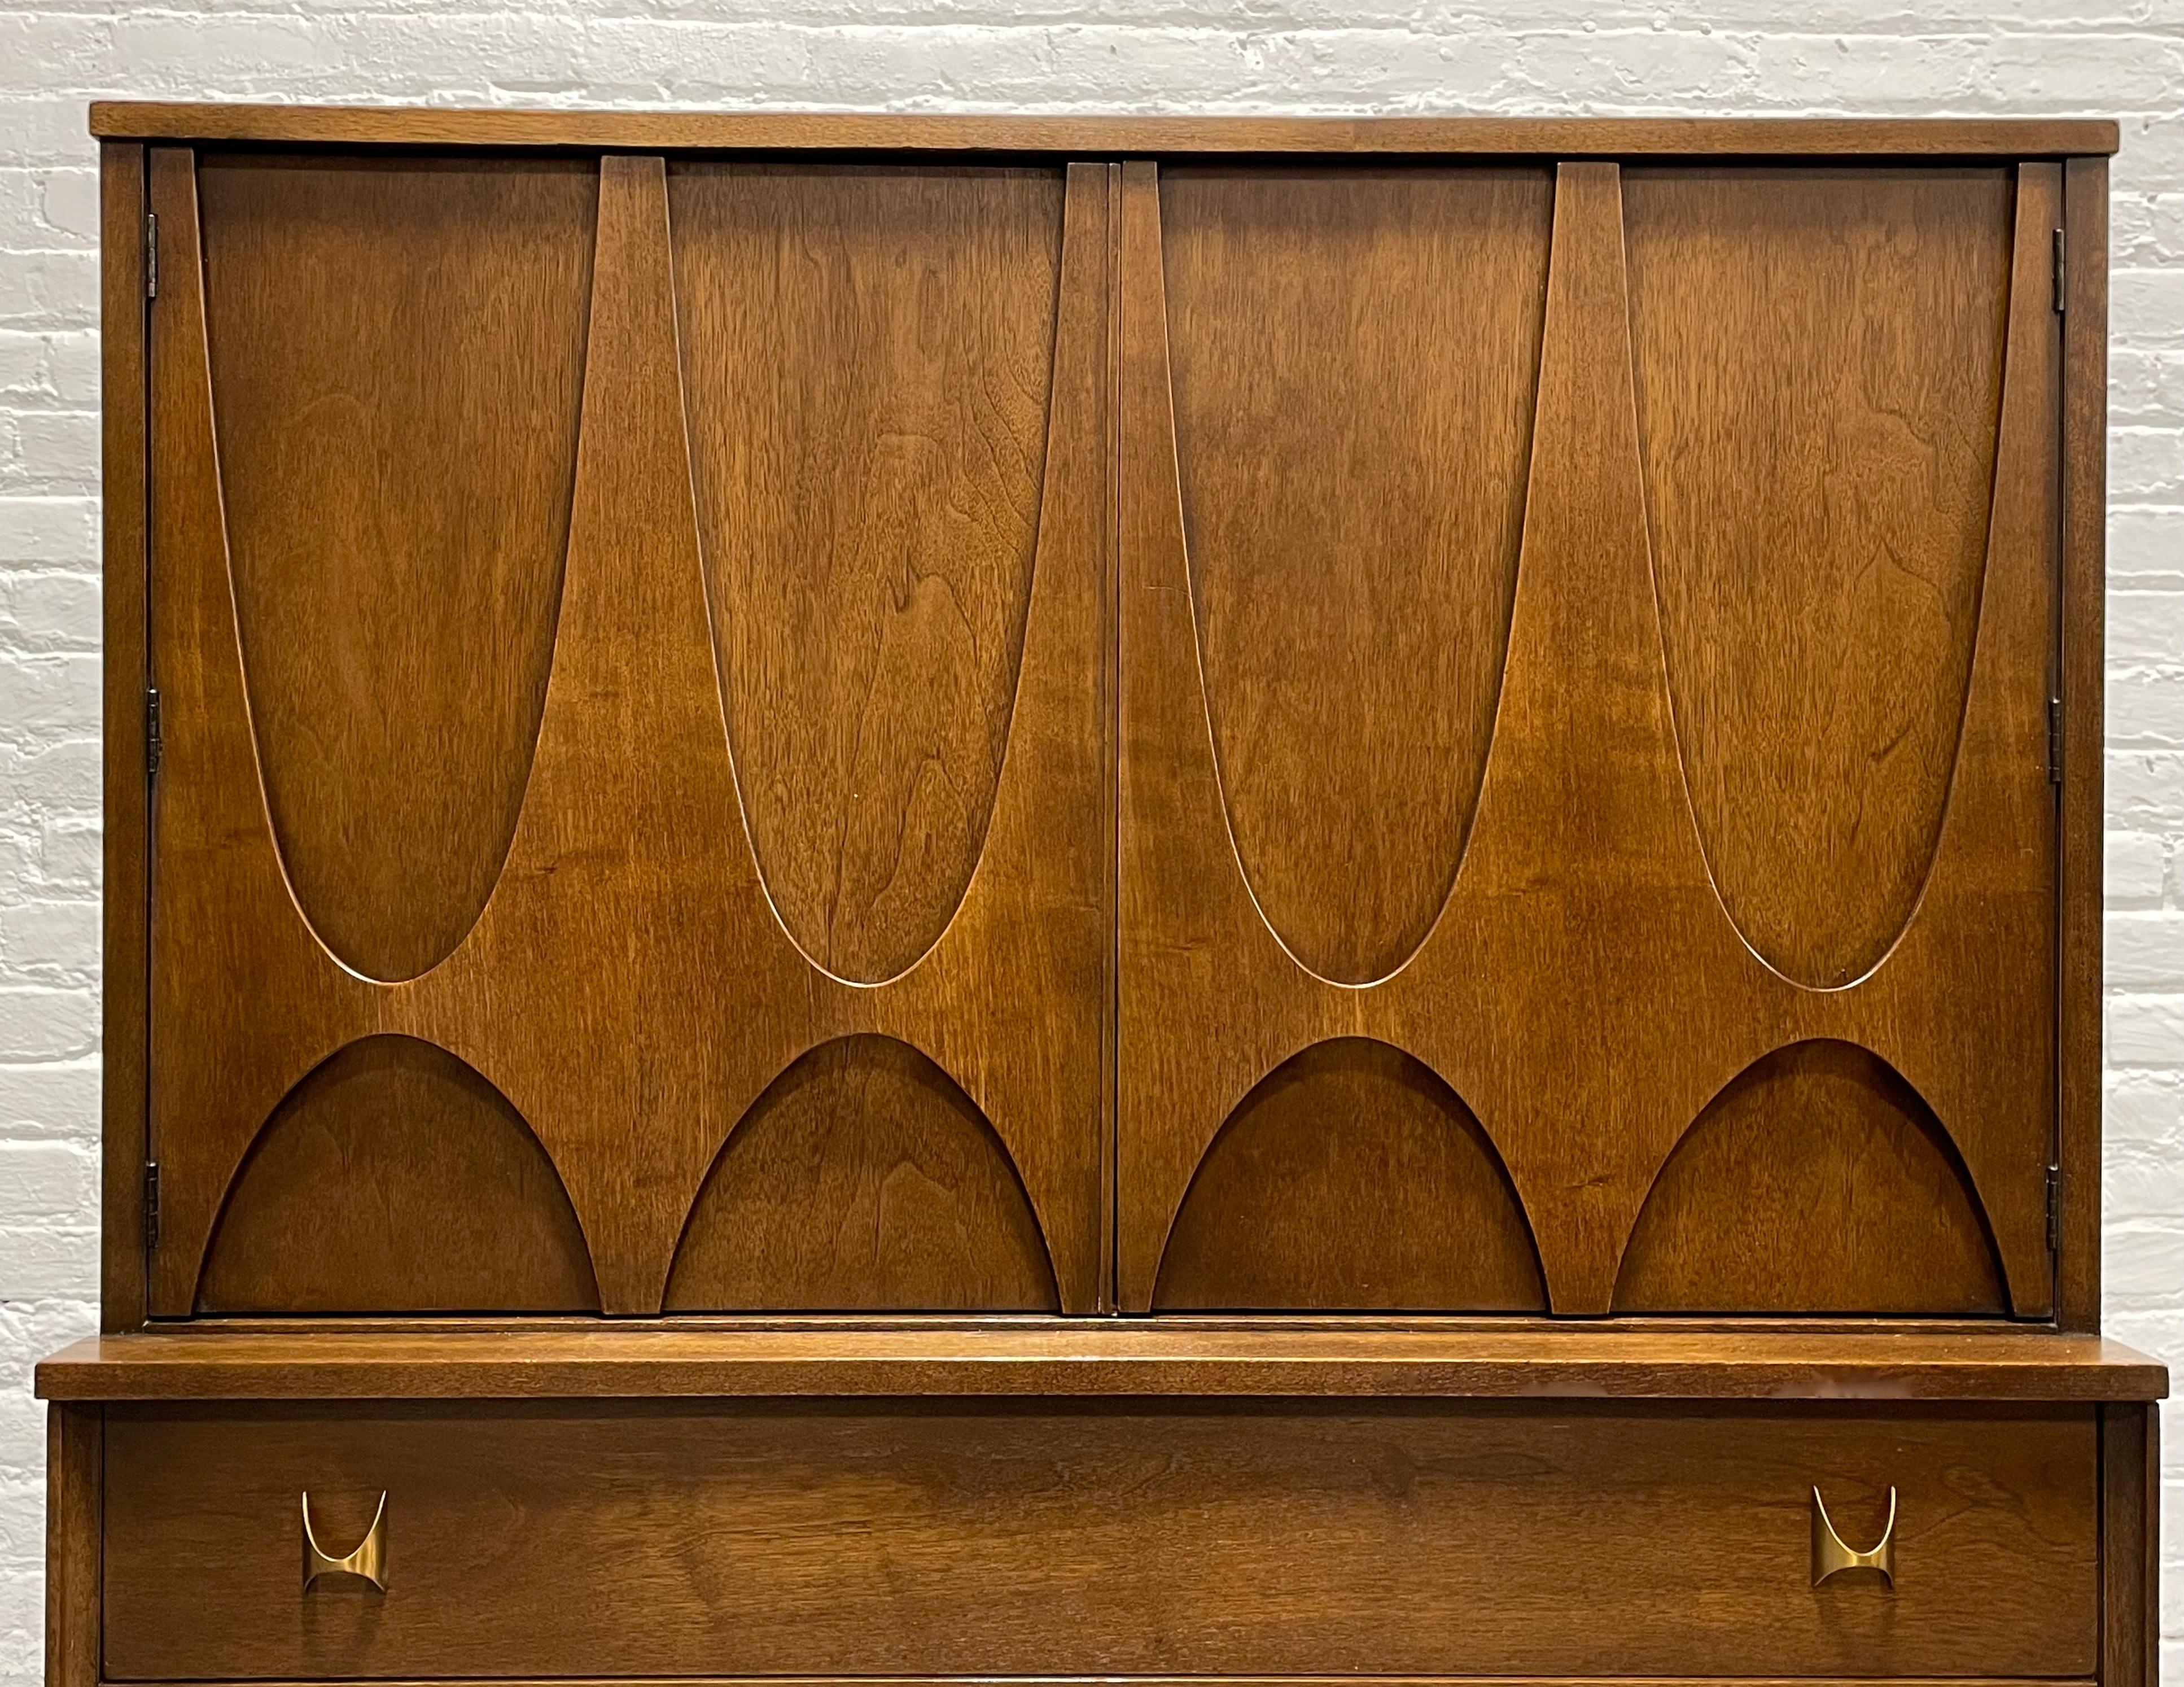 Mid Century Modern Broyhill Brasilia Dresser, circa 1960s. This is a magnificent dresser from the much beloved and voraciously collected Brasilia collection. From the distinctive elongated, inverted sculpted arches to the brass hand pulls, this